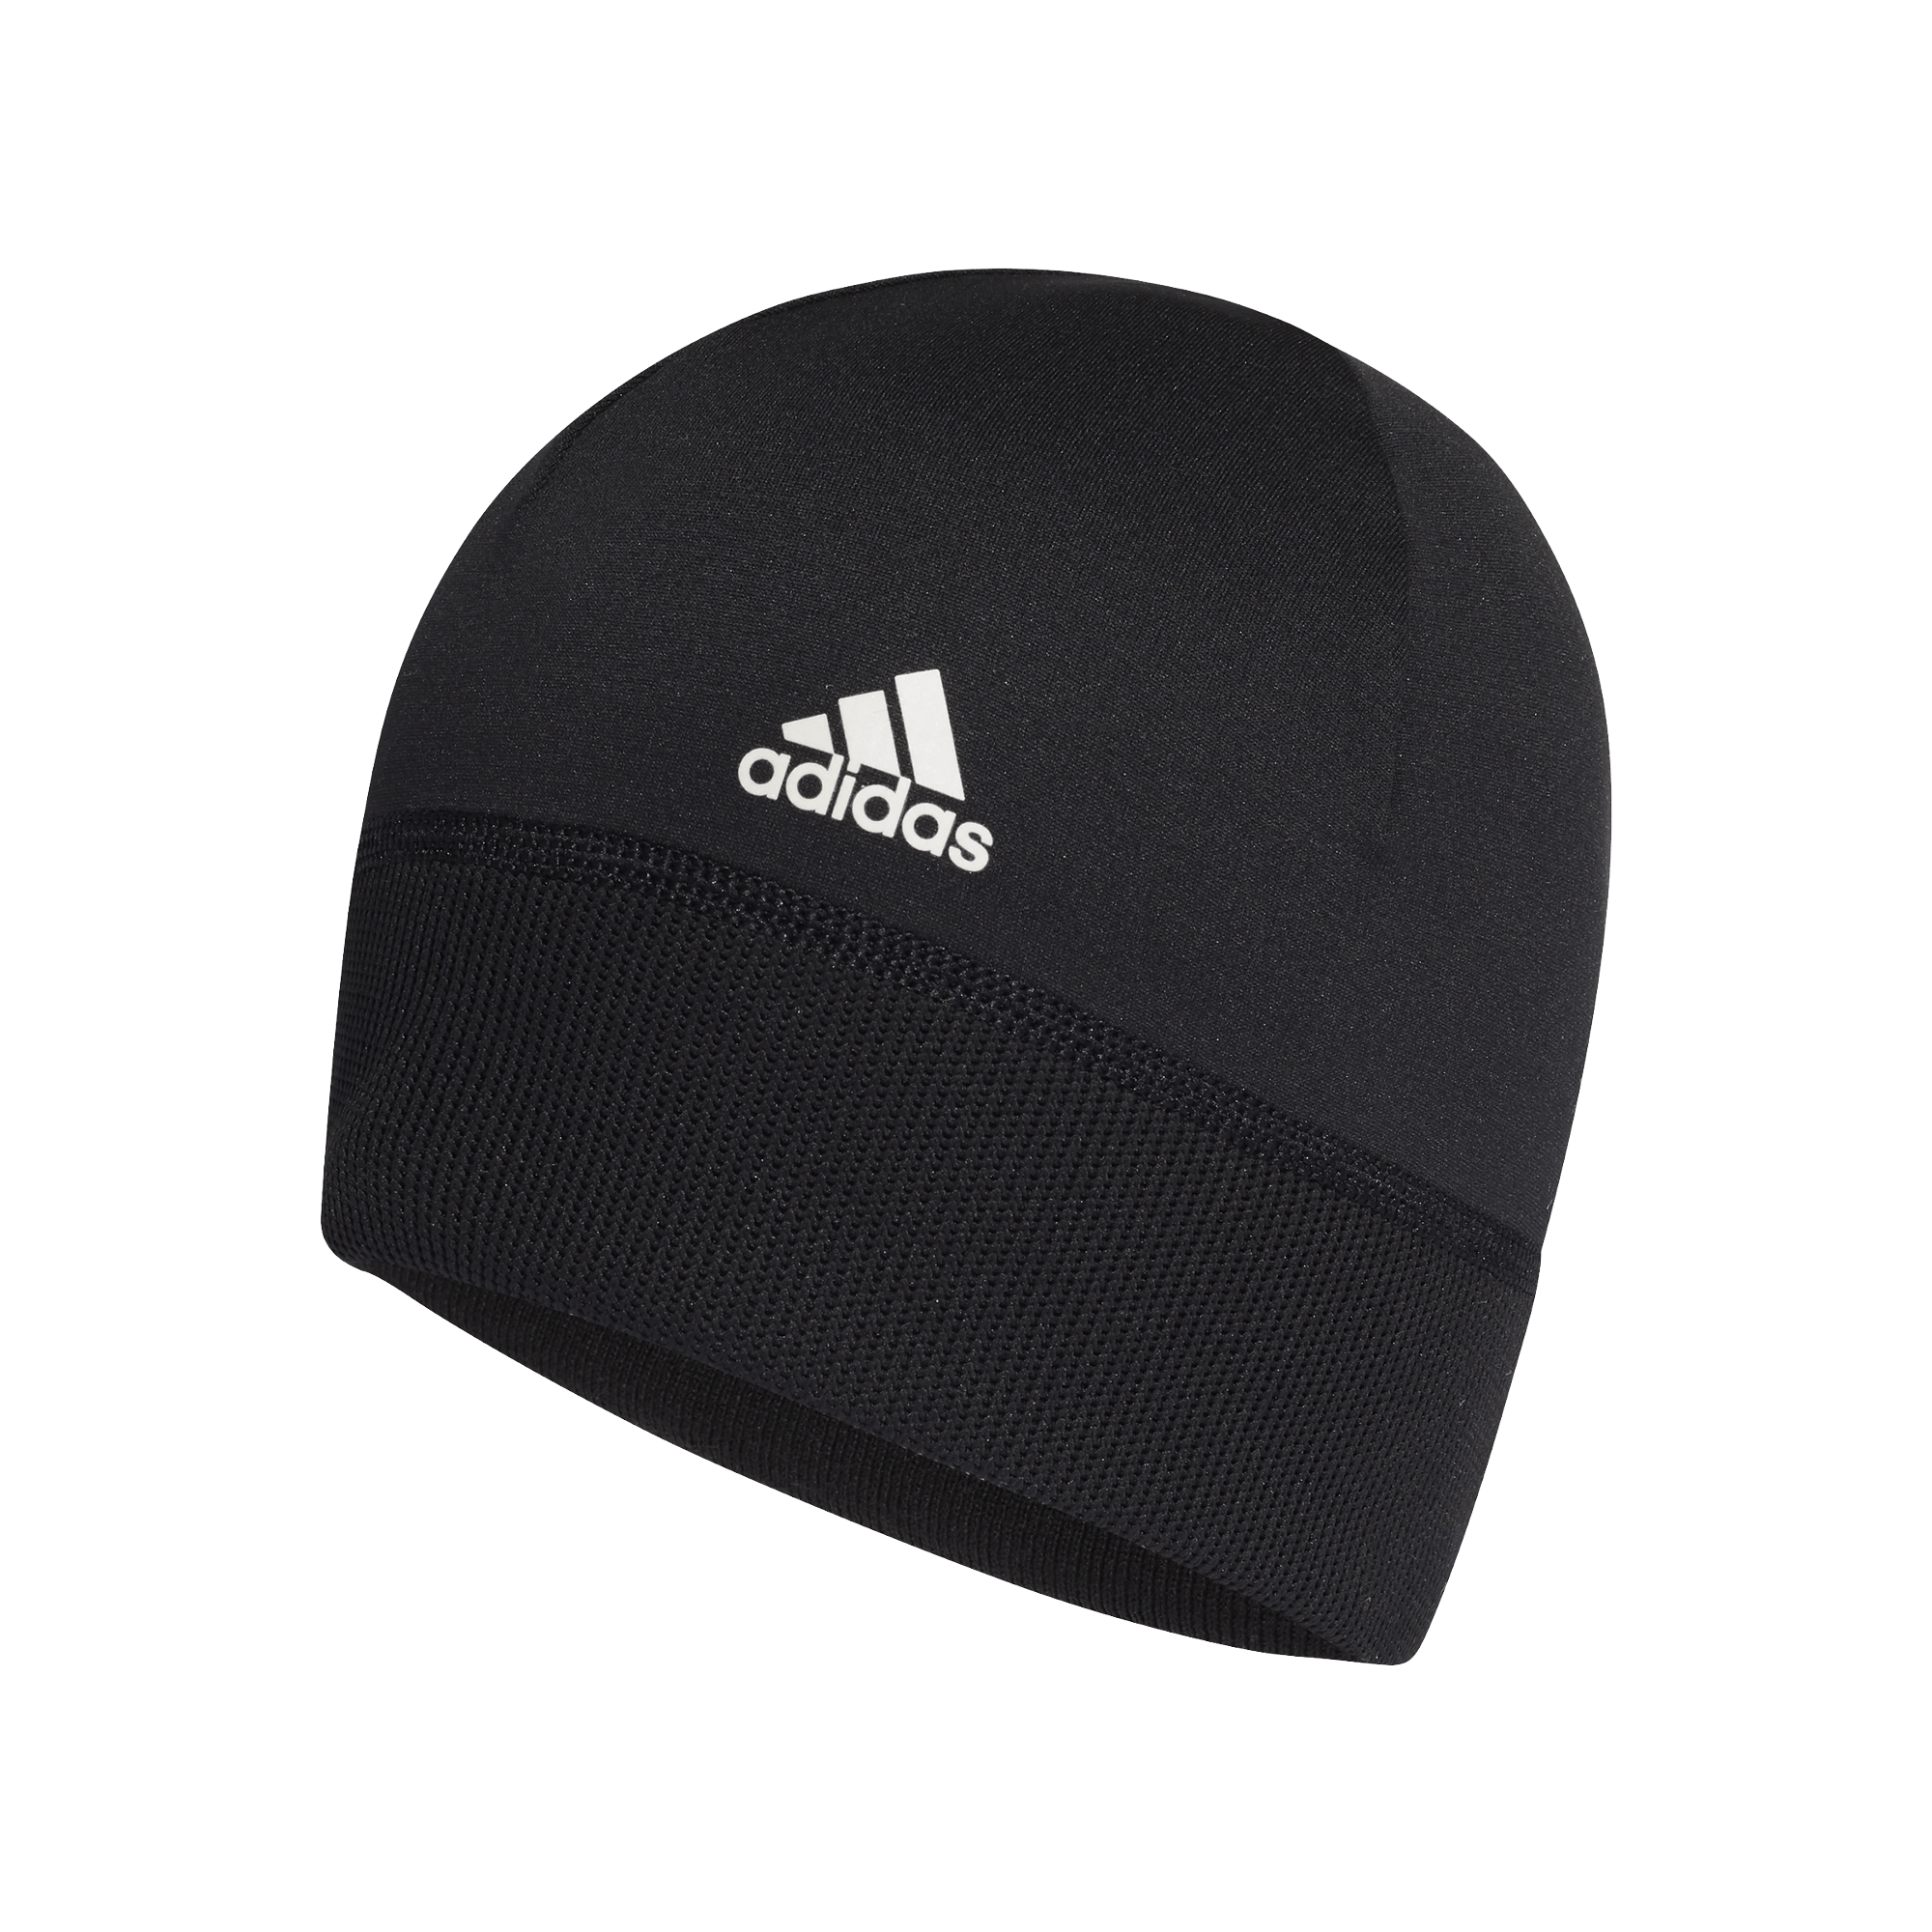 All Blacks Rugby Beanie | New Zealand Rugby 2021 Moisture Wicking Polyester  Beanie by Adidas - World Rugby Shop